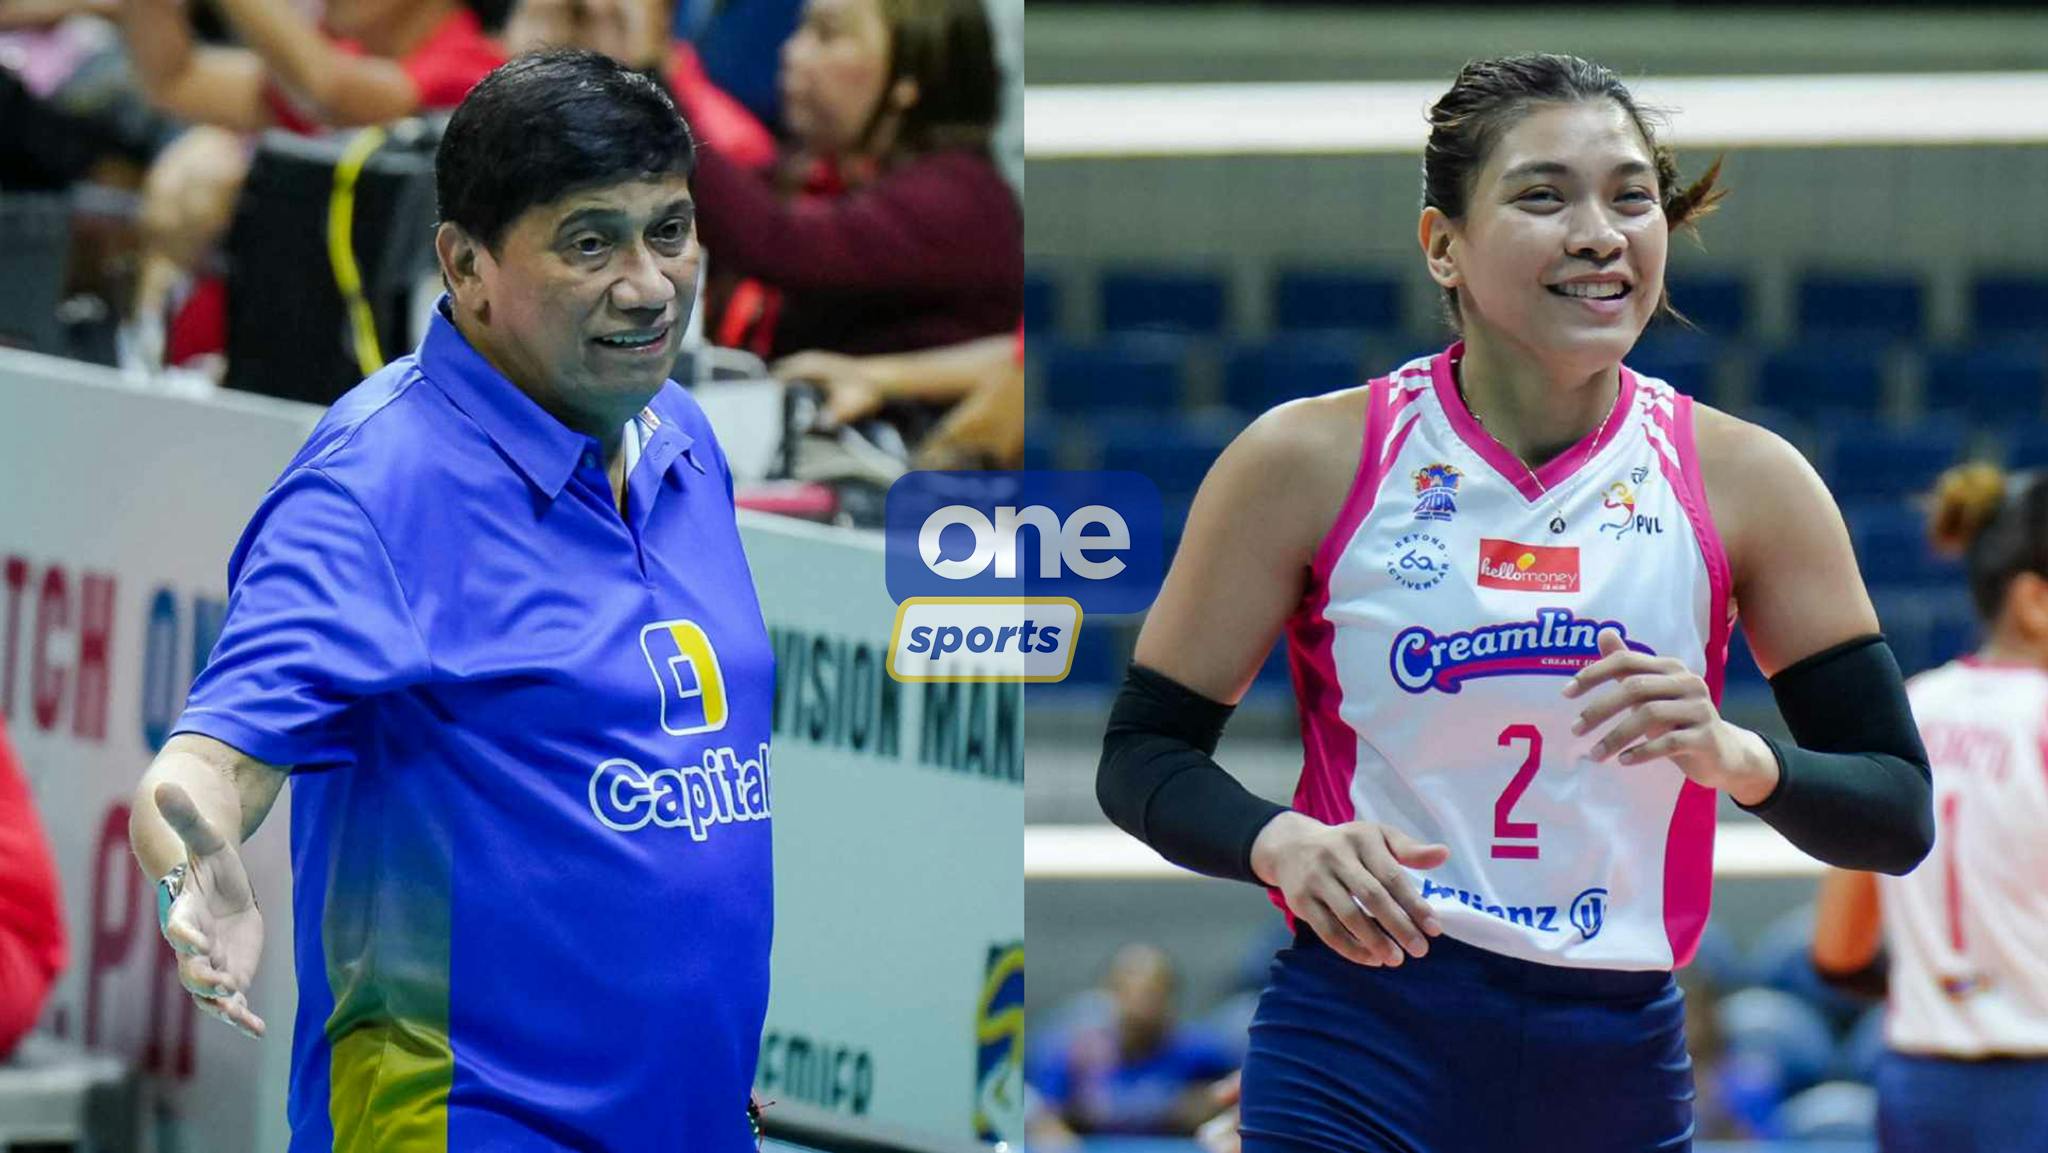 PVL: Alyssa Valdez elated to see Roger Gorayeb coach to his heart’s content